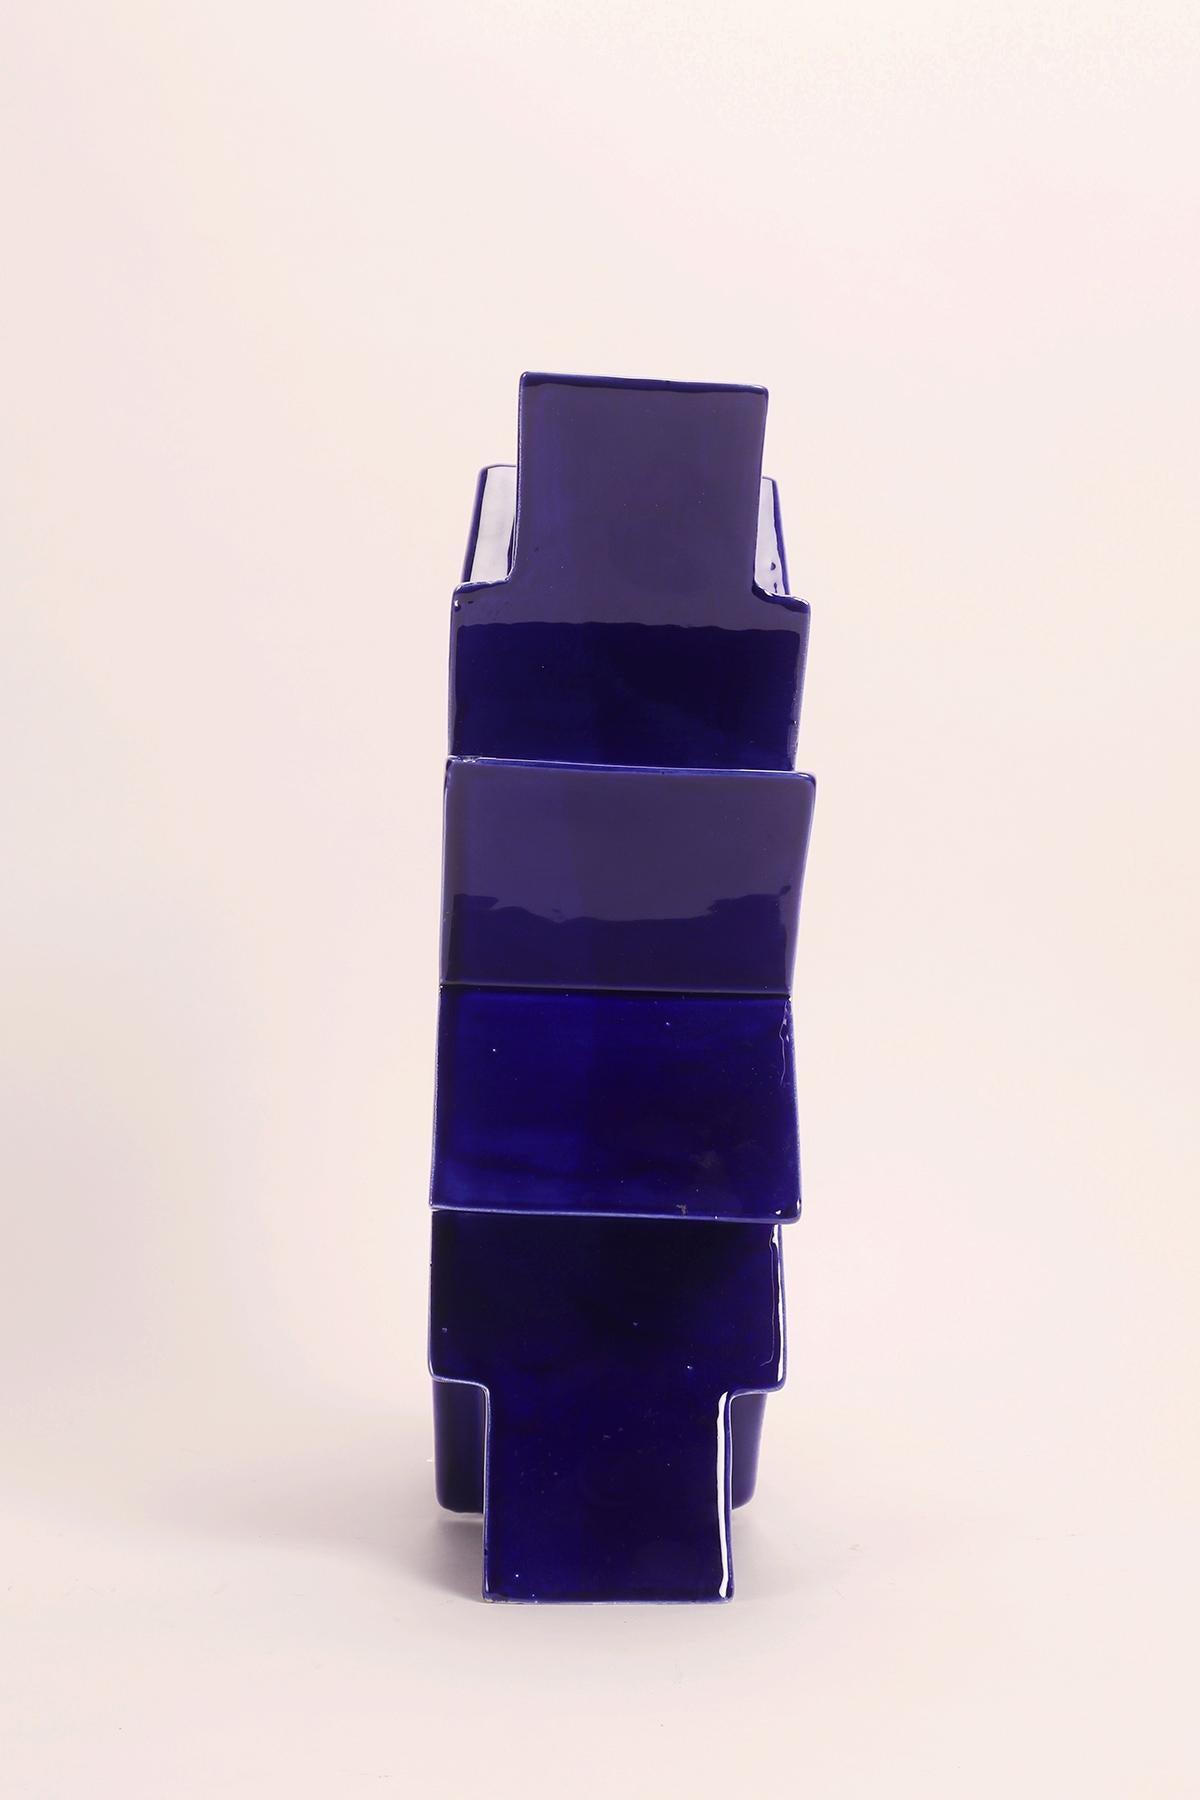 Ceramic vase Memphis by Luciano Florio Paccagnella, Milan, 1990’s.  For Sale 4